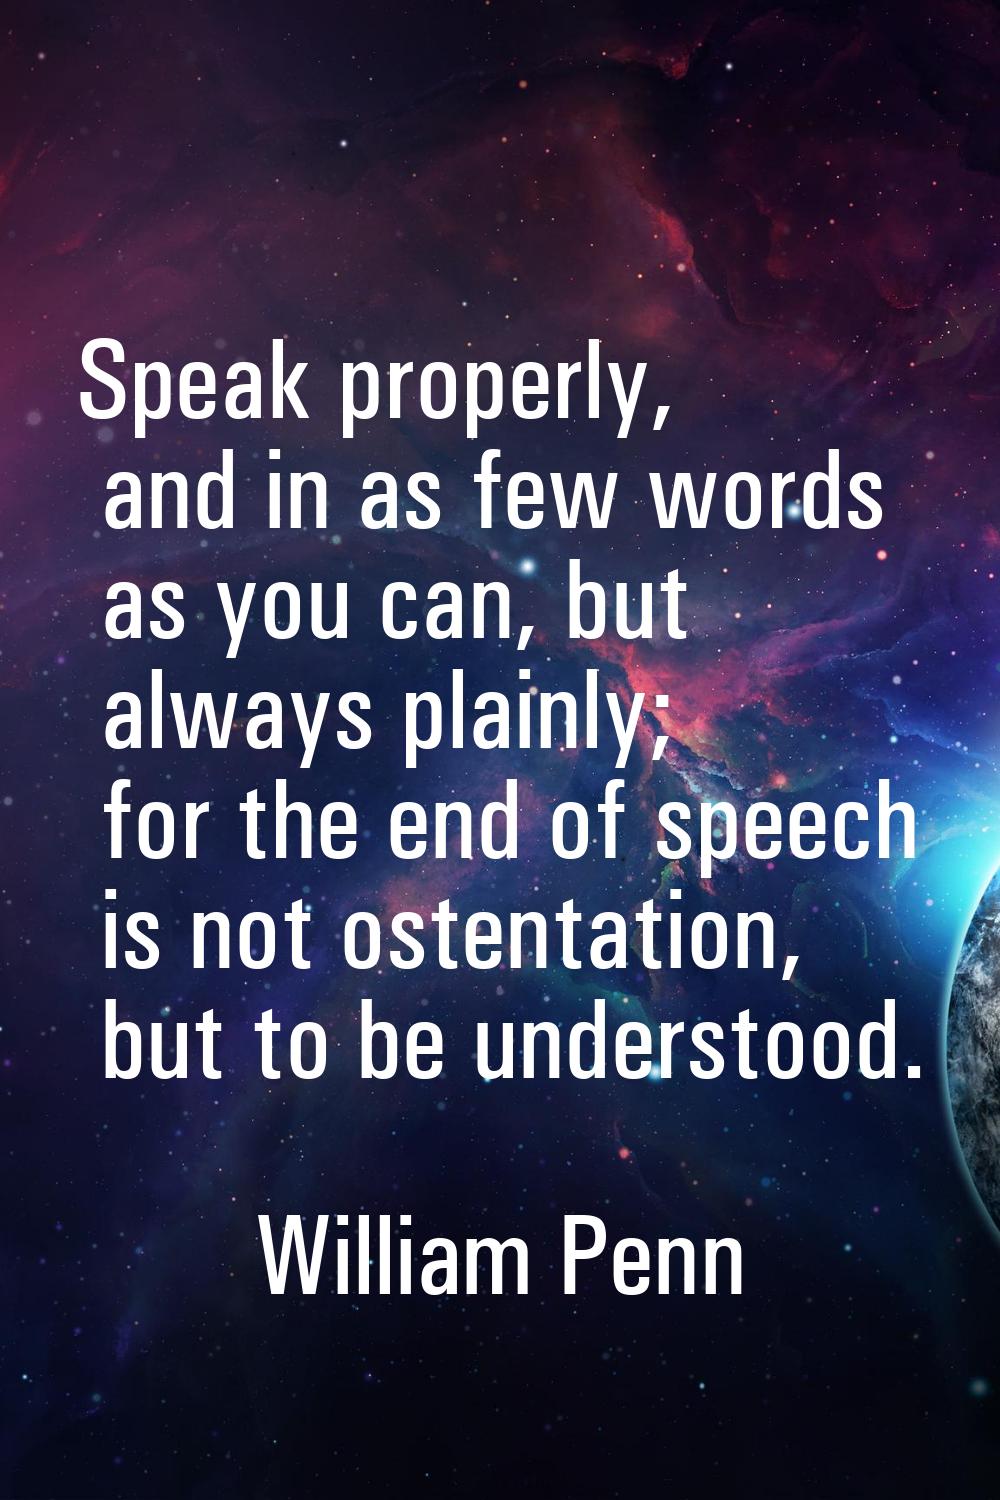 Speak properly, and in as few words as you can, but always plainly; for the end of speech is not os